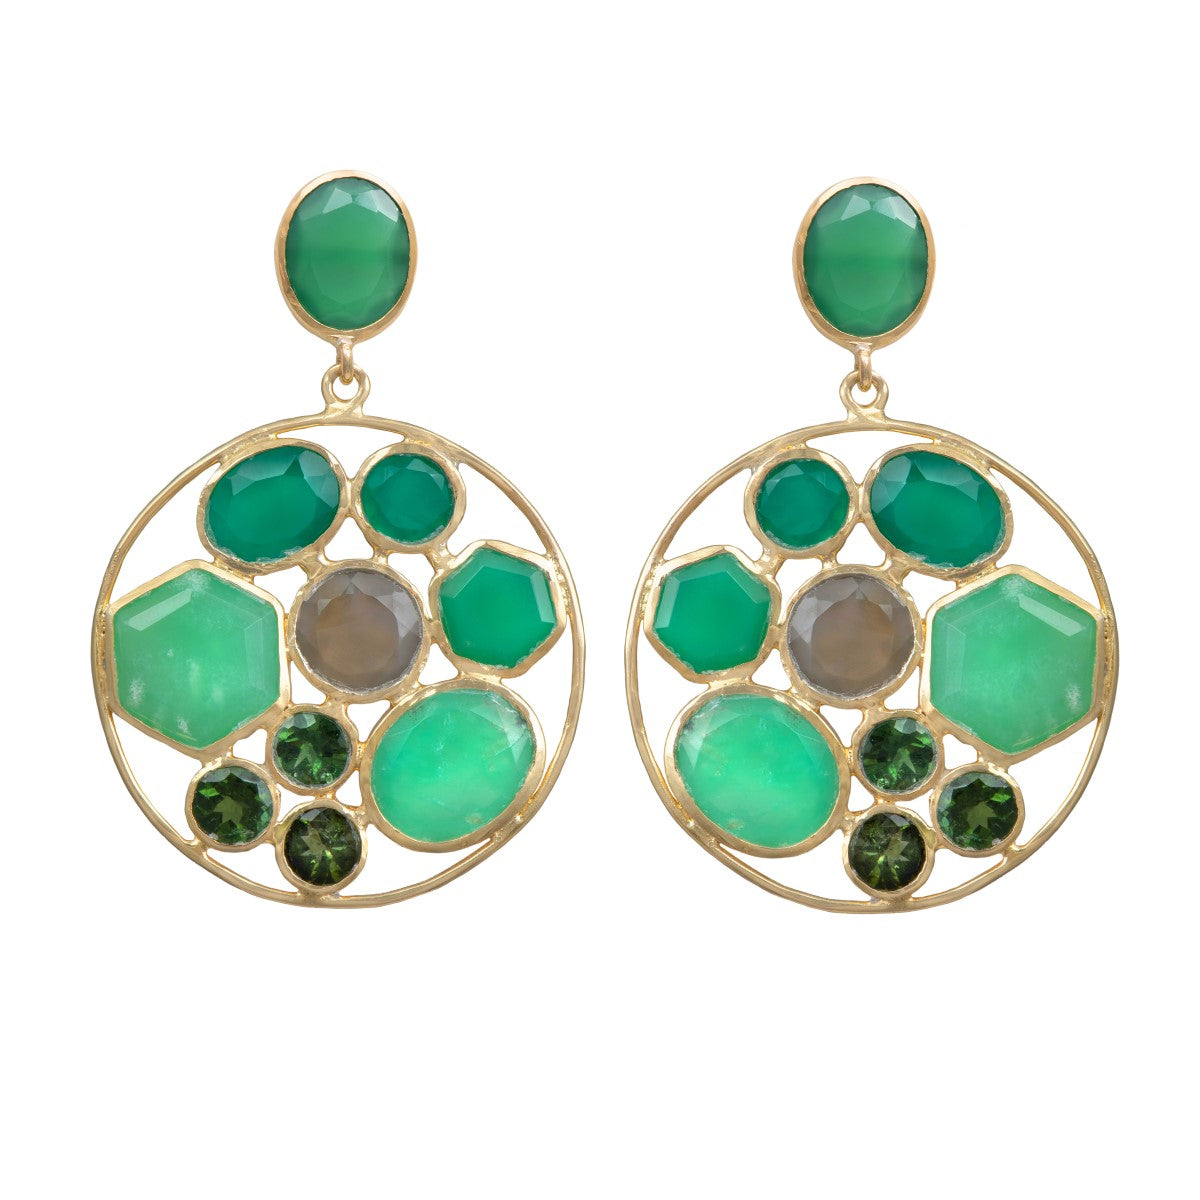 Long Gemstone Earrings with a Round Disc Drop with Stones in Gold Plated Sterling Silver - Green Chalcedony and Green Onyx